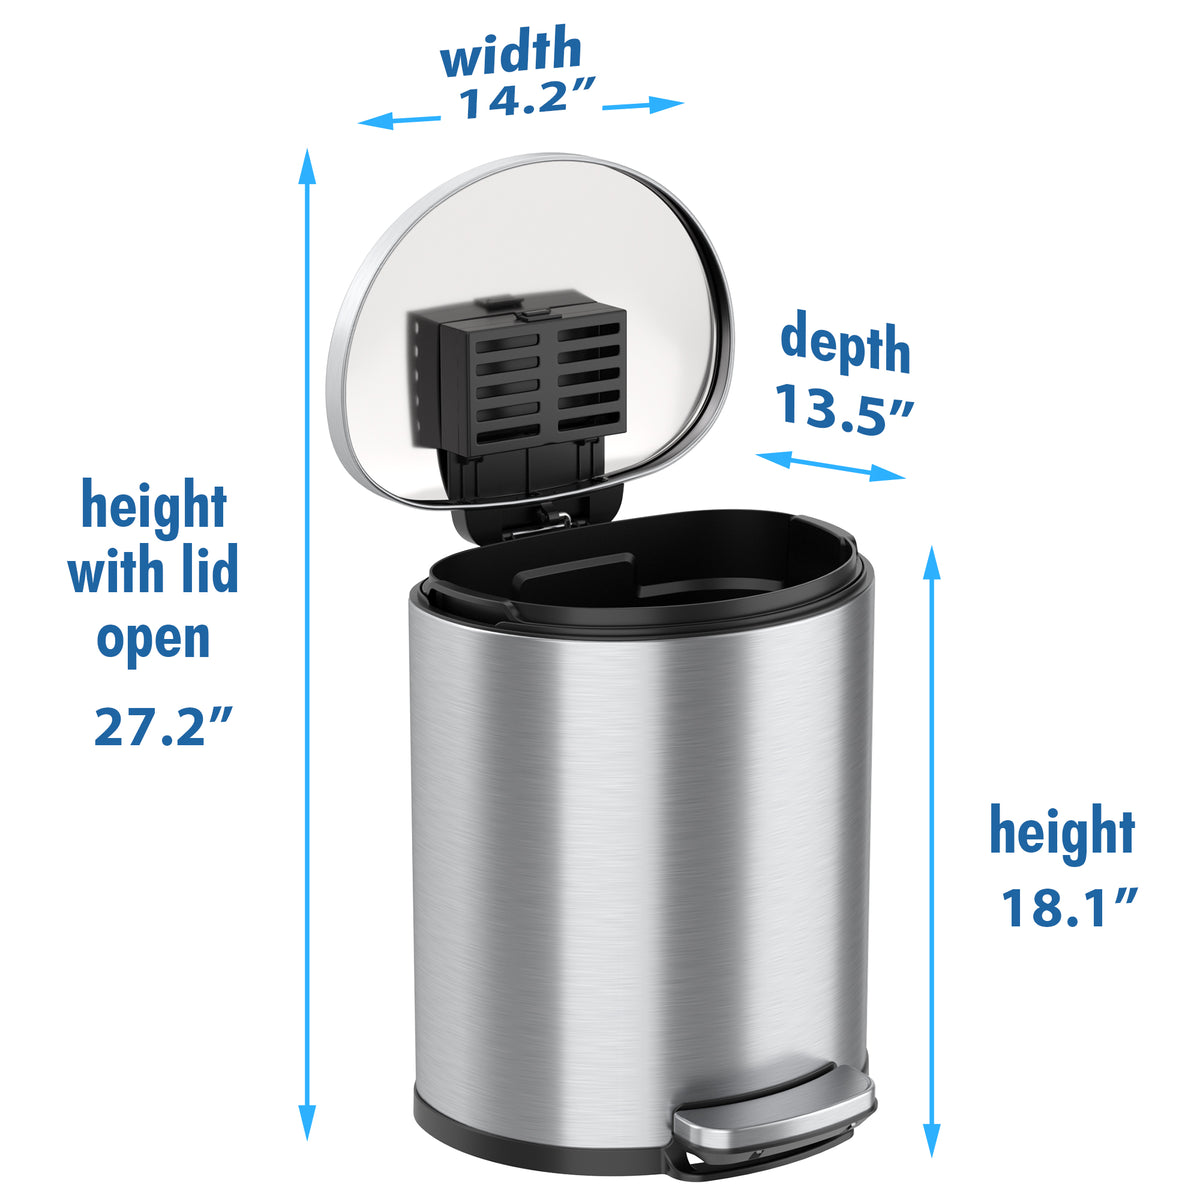 5 Gallon / 19 Liter SoftStep Semi-Round Step Pedal Trash Can dimensions